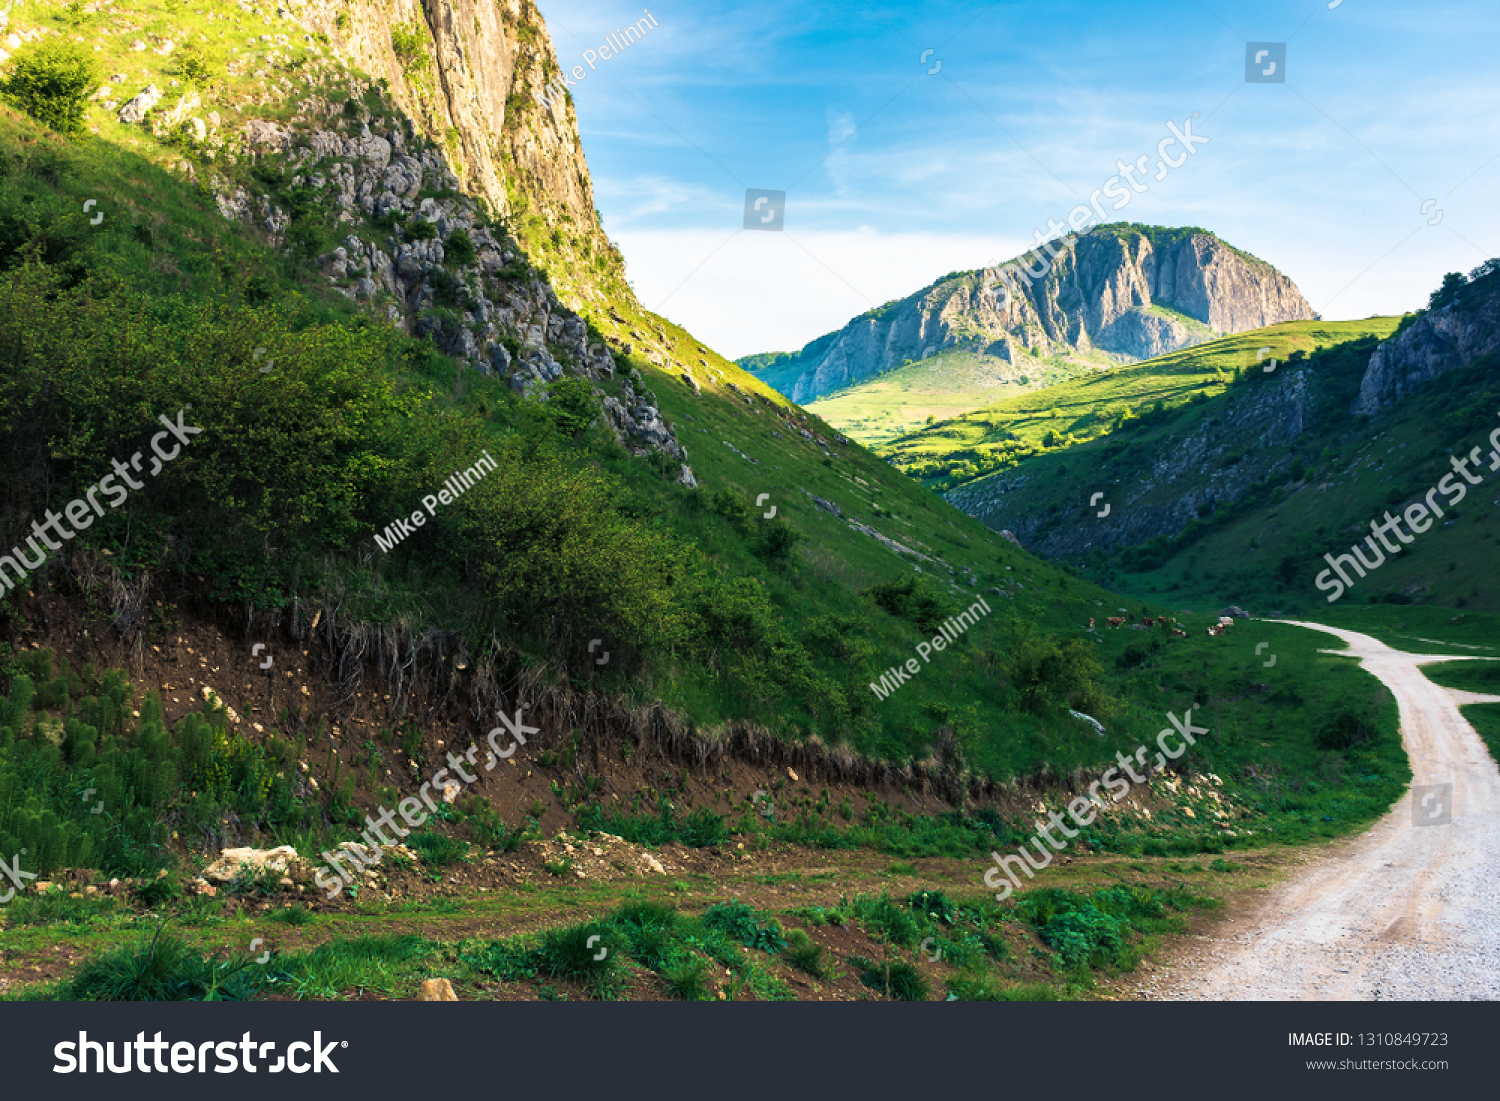 amazing countryside in romania mountains. huge cliffs above grassy meadows. cattle of cows grazing in  the distance. road in to the gorge. beautiful landscape in springtime at sunrise #1310849723